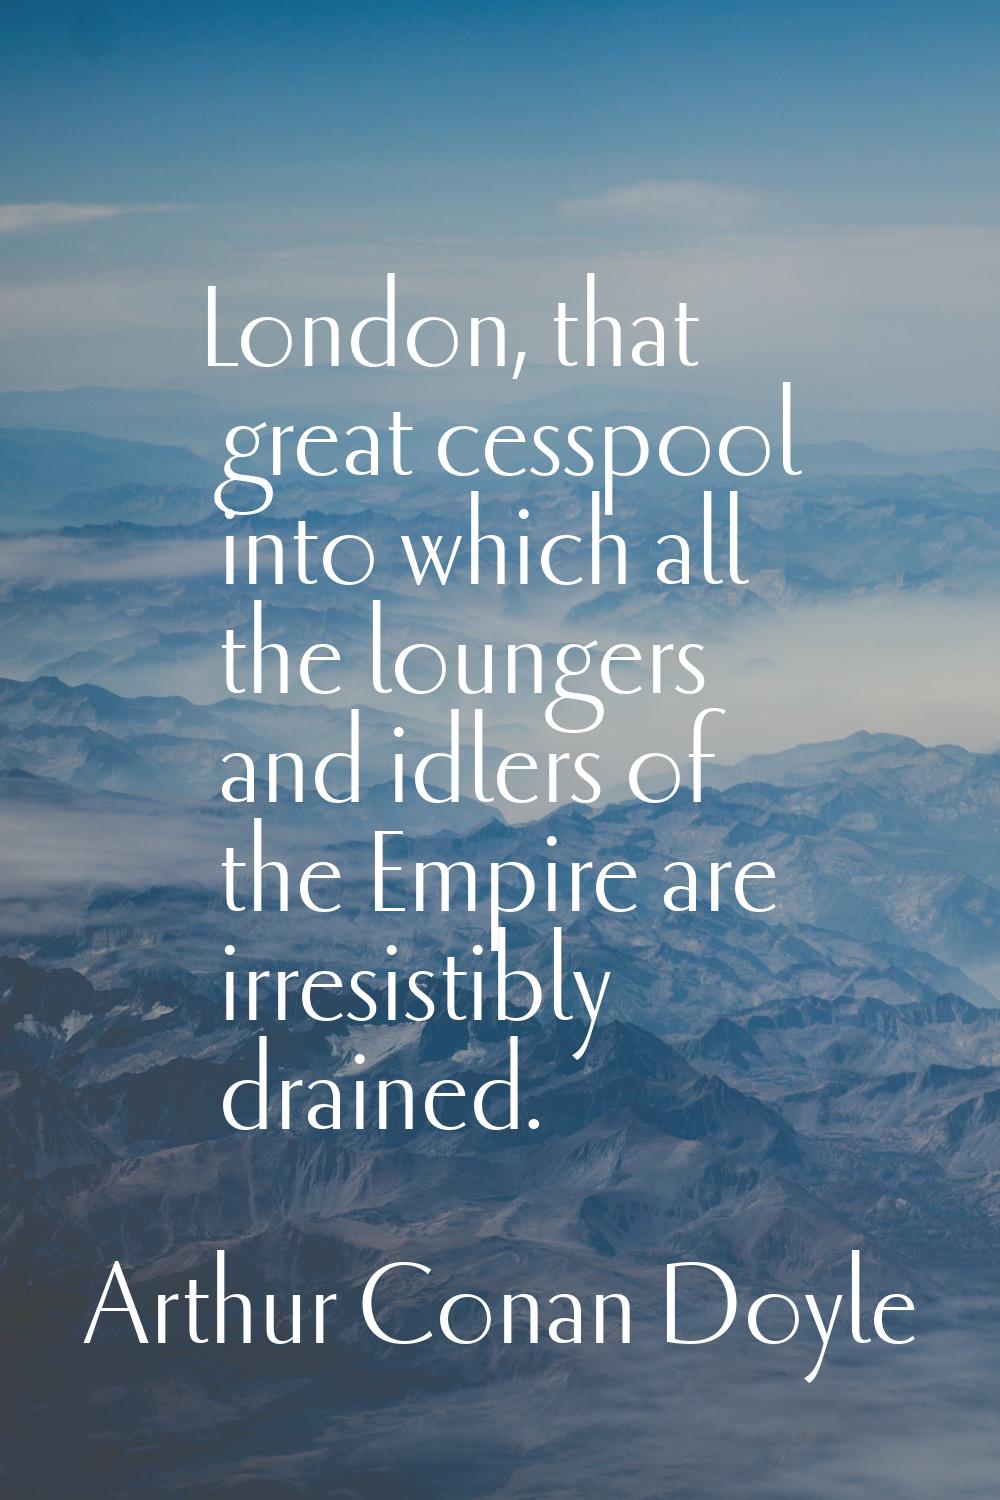 London, that great cesspool into which all the loungers and idlers of the Empire are irresistibly d